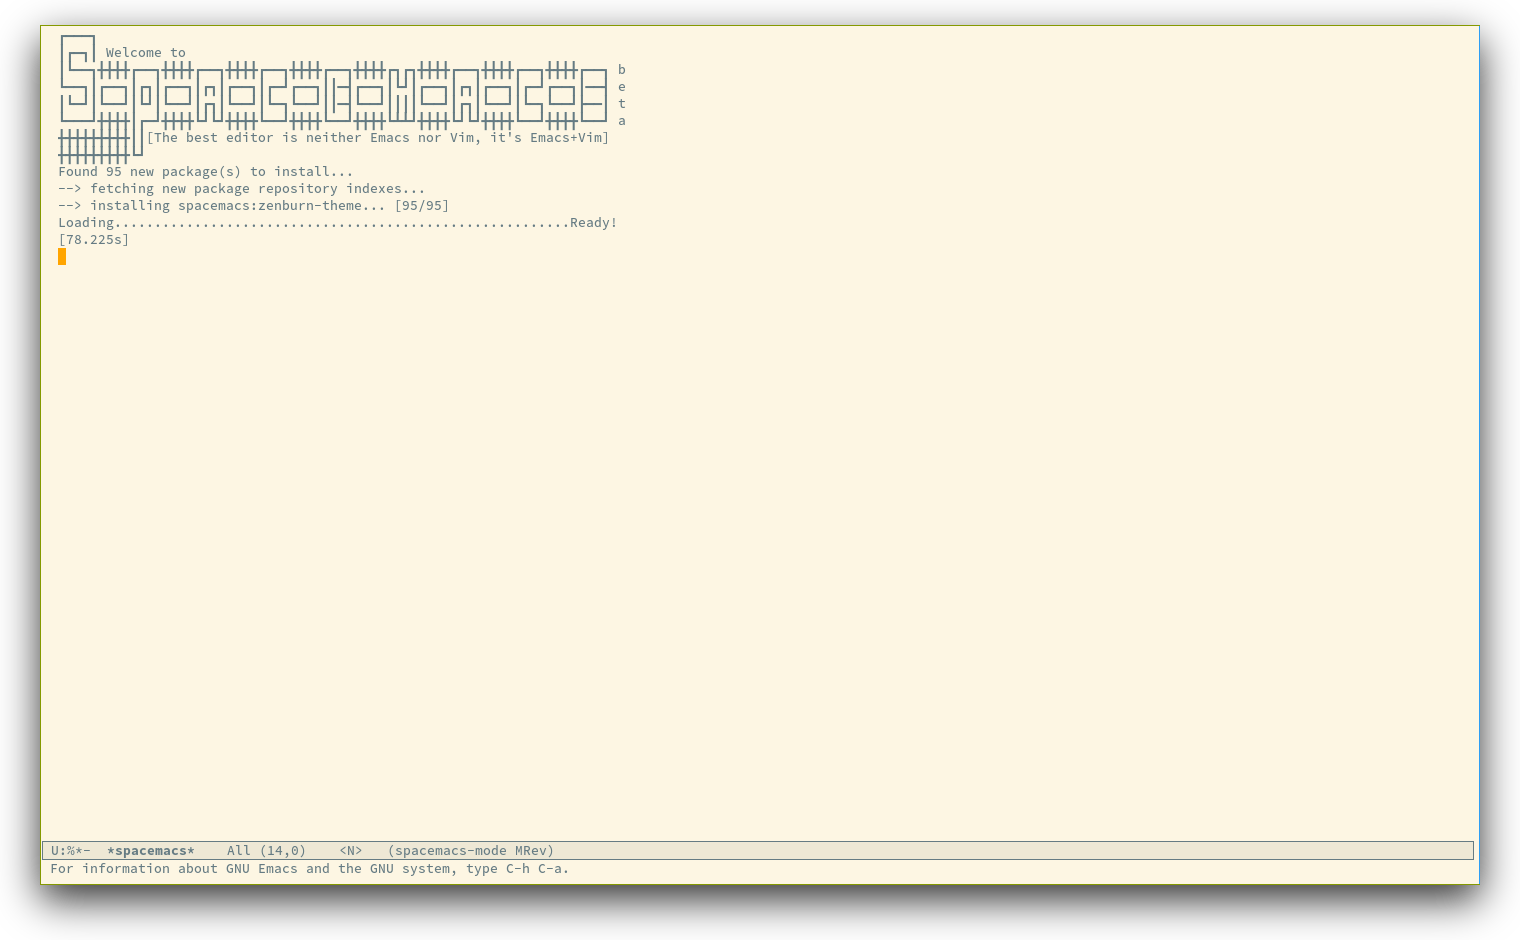 /TakeV/spacemacs/media/commit/0fb5e2403973209a065e7167dc1c721e0ce6a974/doc/img/spacemacs-startup.png